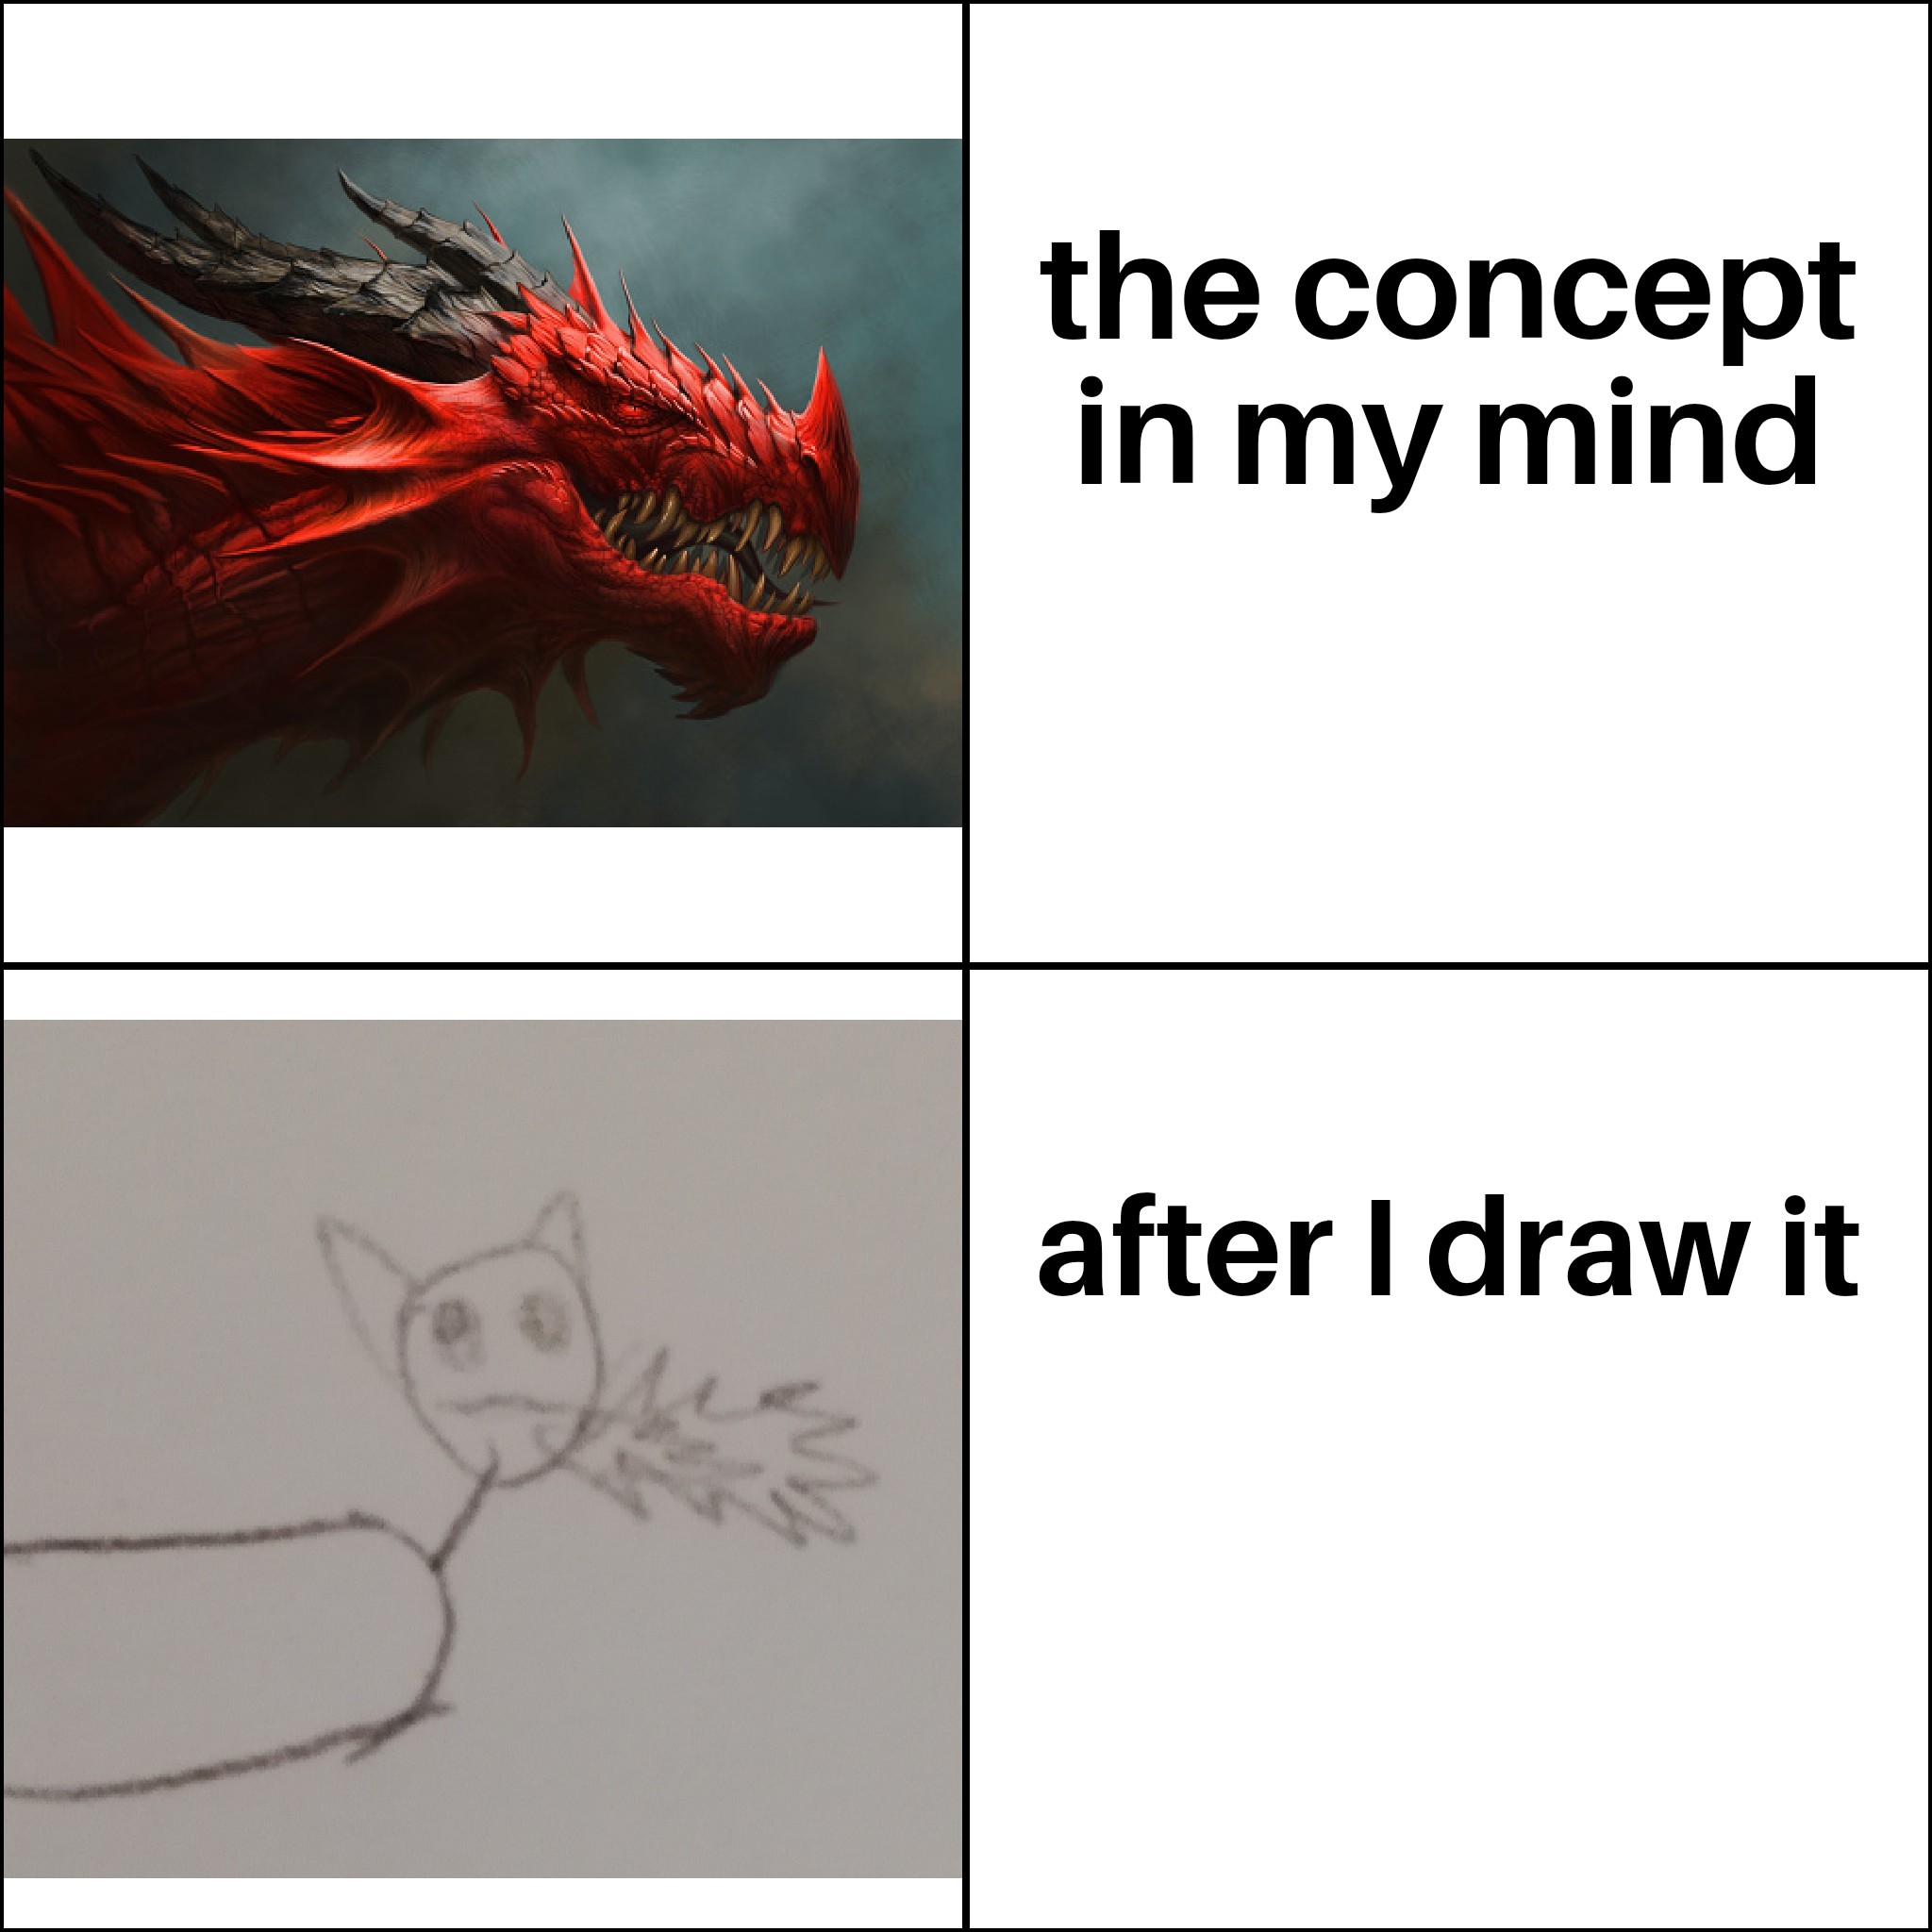 funny memes - dank memes - design - the concept in my mind after I draw it G